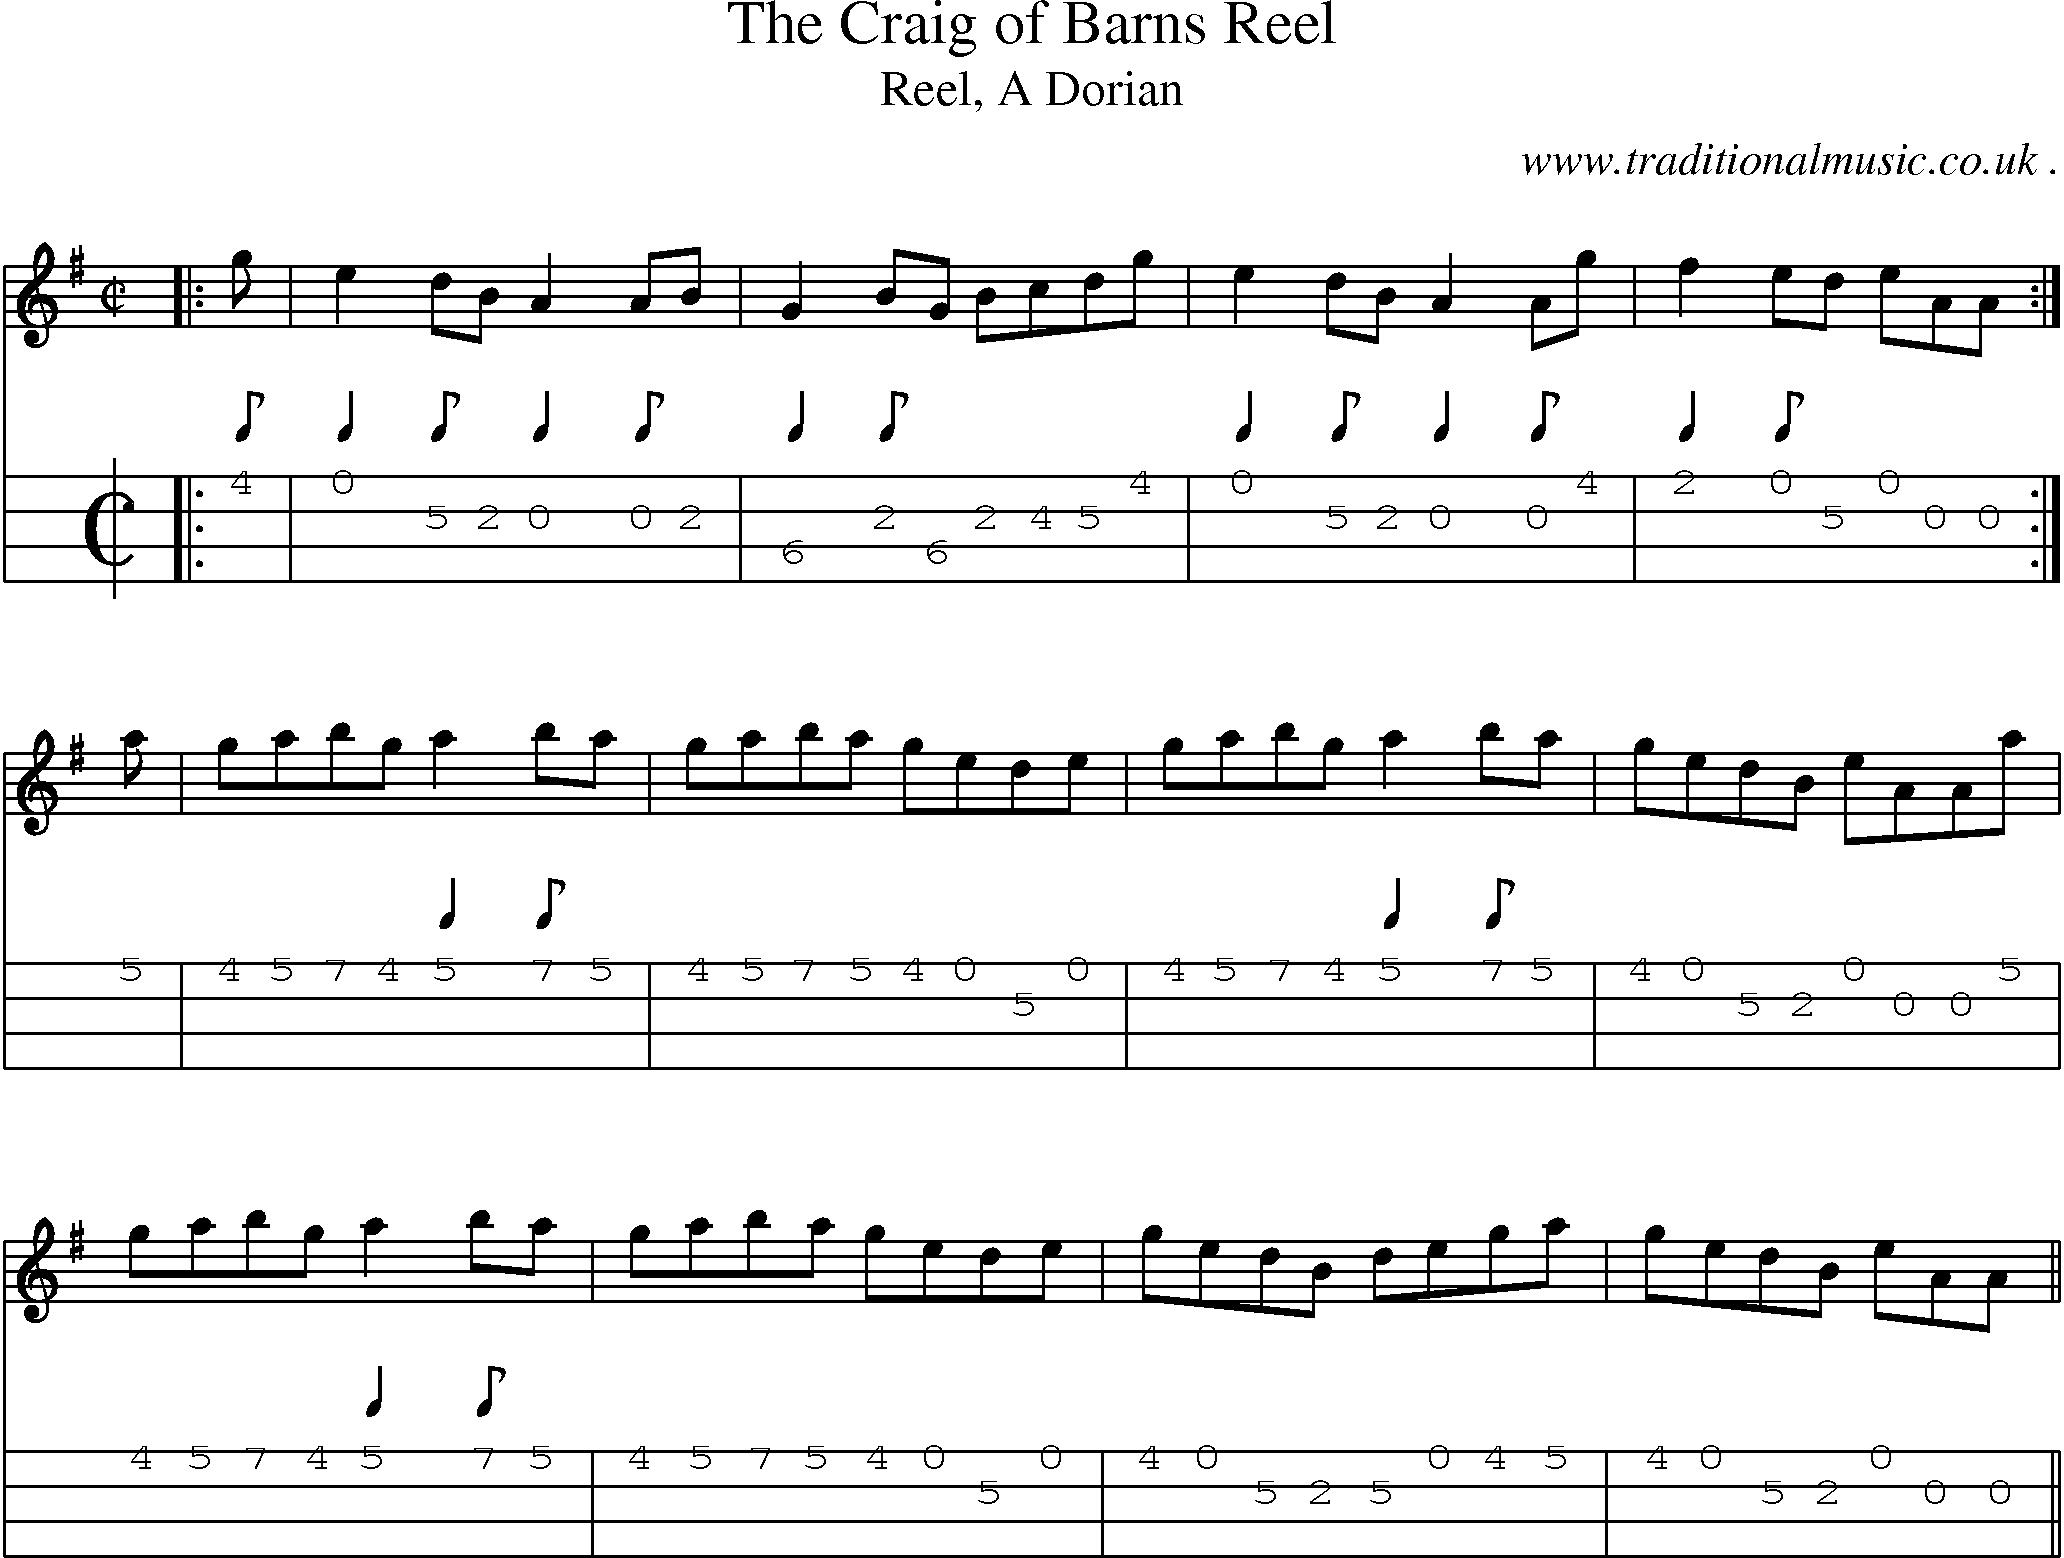 Sheet-music  score, Chords and Mandolin Tabs for The Craig Of Barns Reel